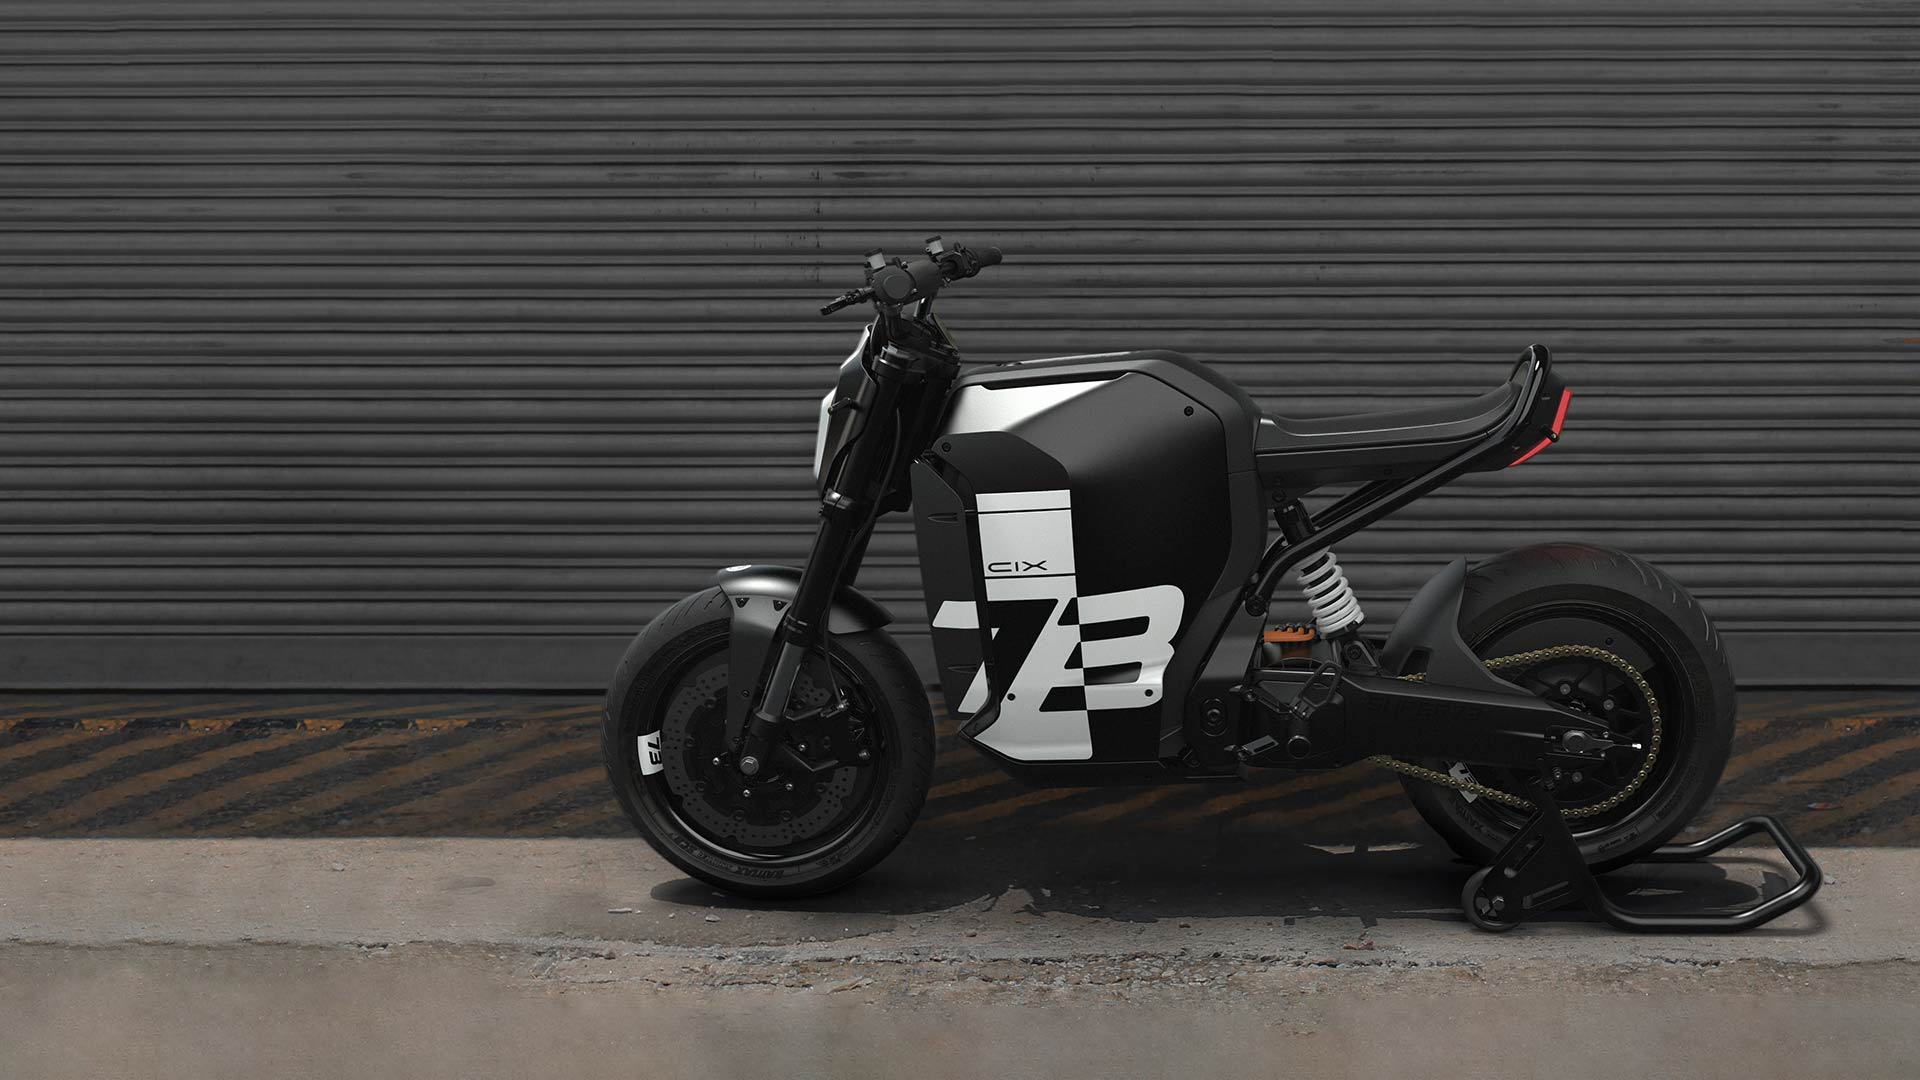 The SUPER73-C1X electric motorbike in an industrial setting